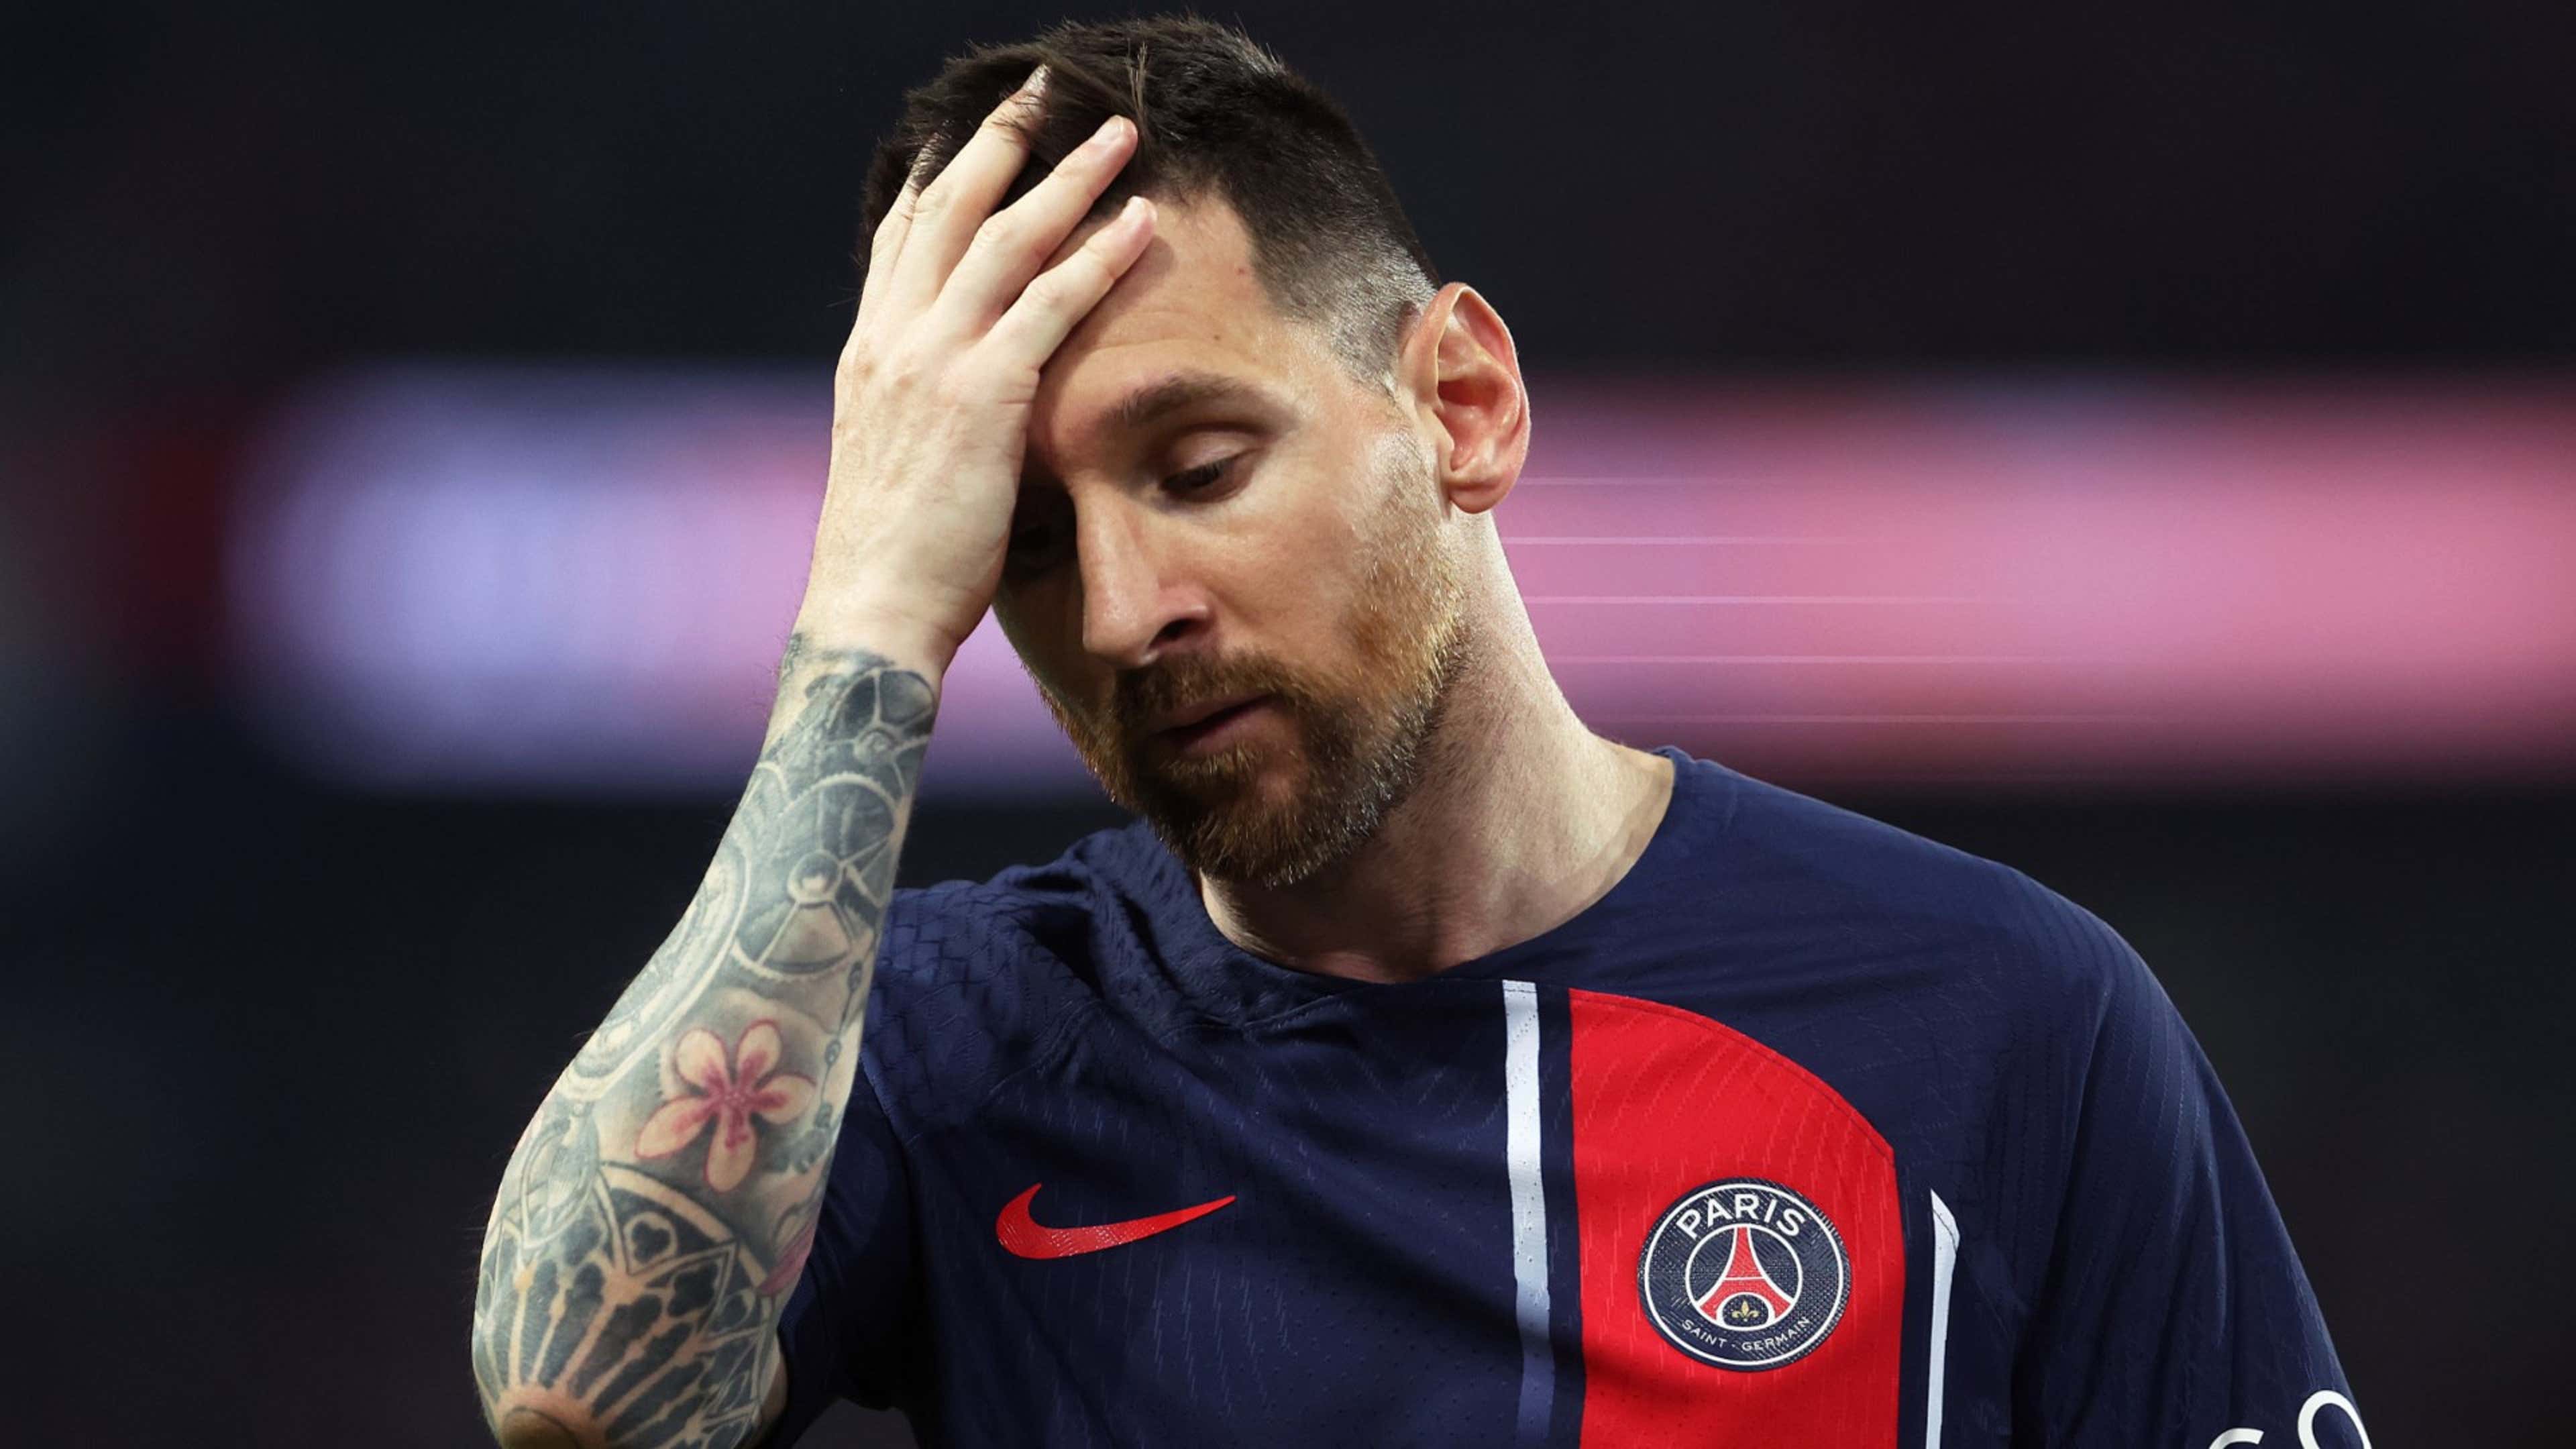 We had it rough!' - Lionel Messi makes it obvious he hated life at PSG as  Inter Miami superstar reflects on being forced out of Barcelona